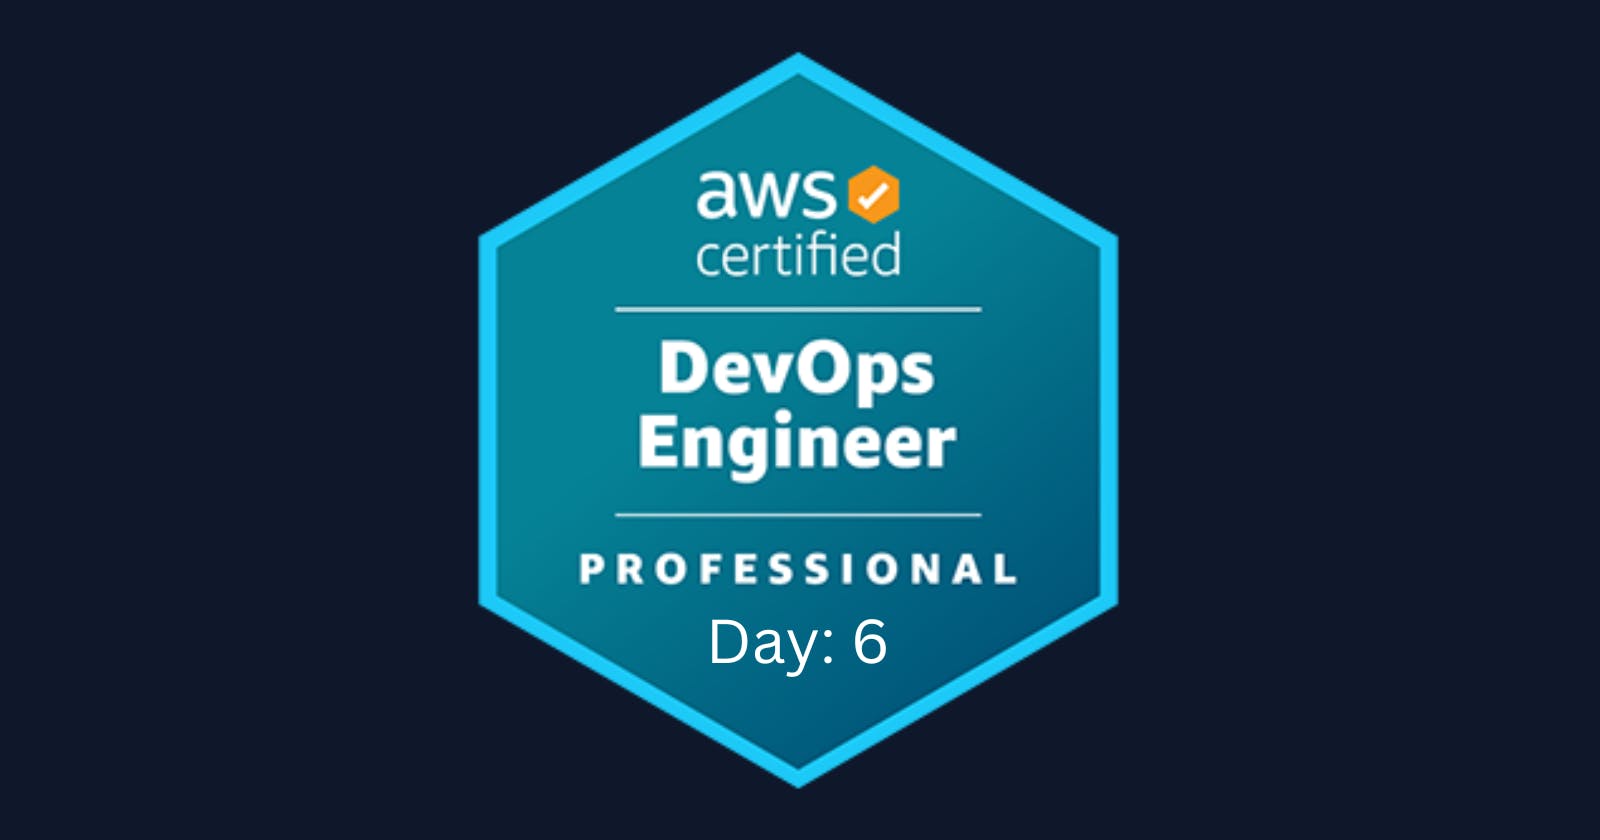 🚀 Exciting Day 6 of My AWS DevOps Engineer Professional Journey! 🚀